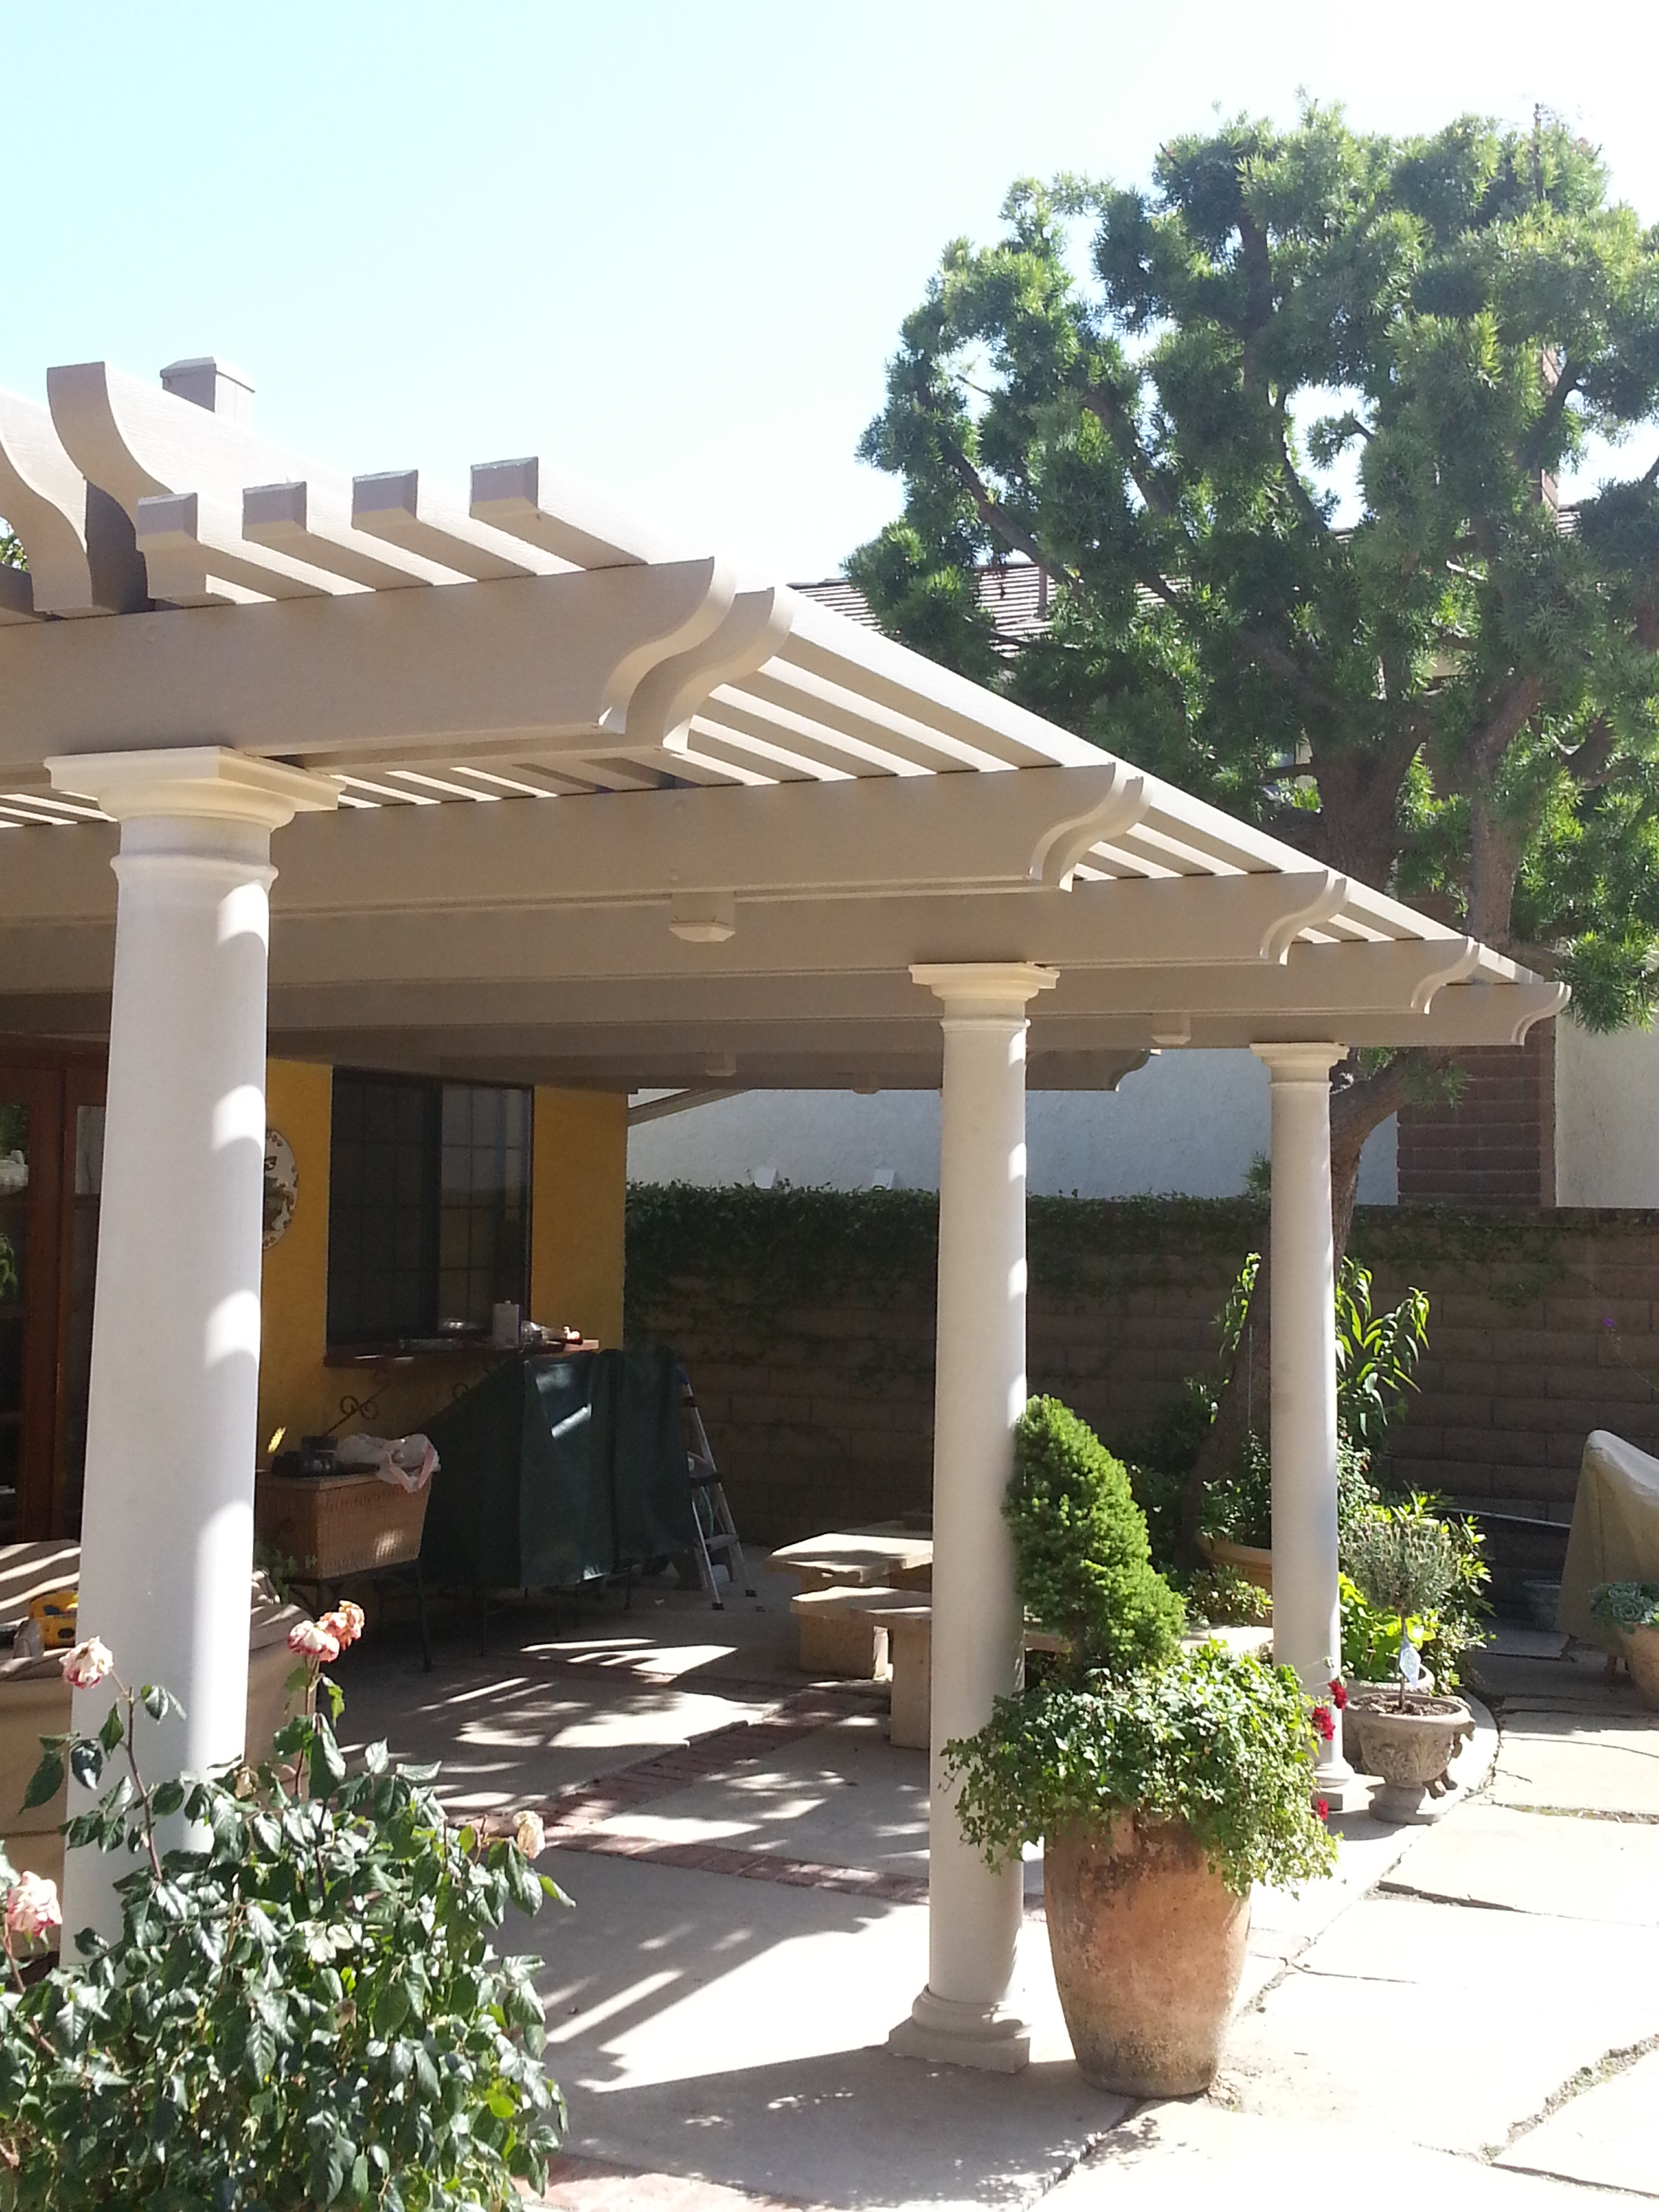 Aluminum Patio Covers Weststyles Construction intended for sizing 2448 X 3264